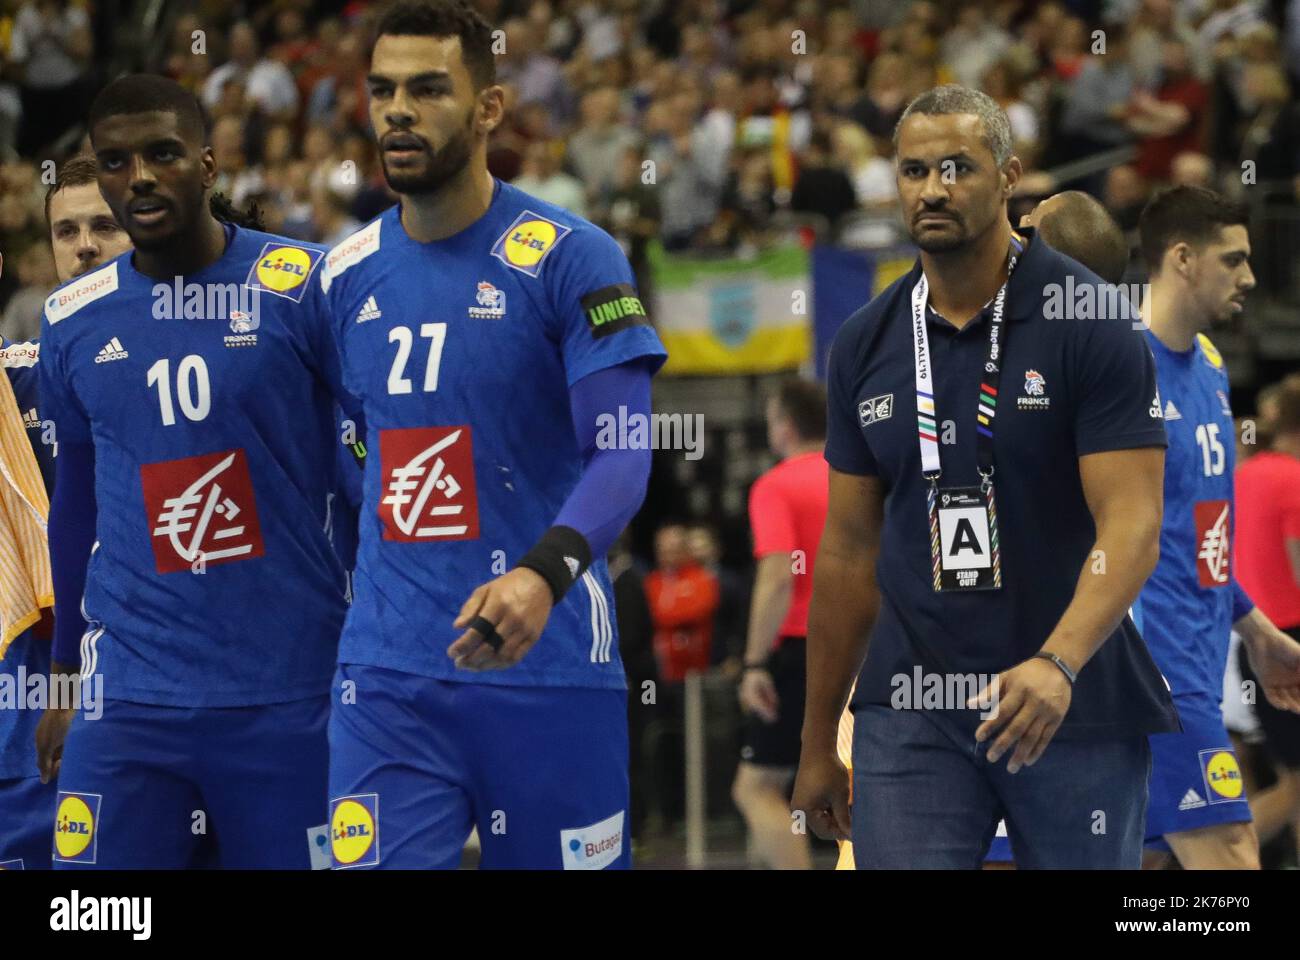 Coach Didier Dinart , Adrien Dipanda and Dika Mem (France) during the IHF Men's World Championship 2019, Group A handball match between Germany and France on January 15, 2019 at Mercedes-Benz Arena in Berlin, Germany  Stock Photo